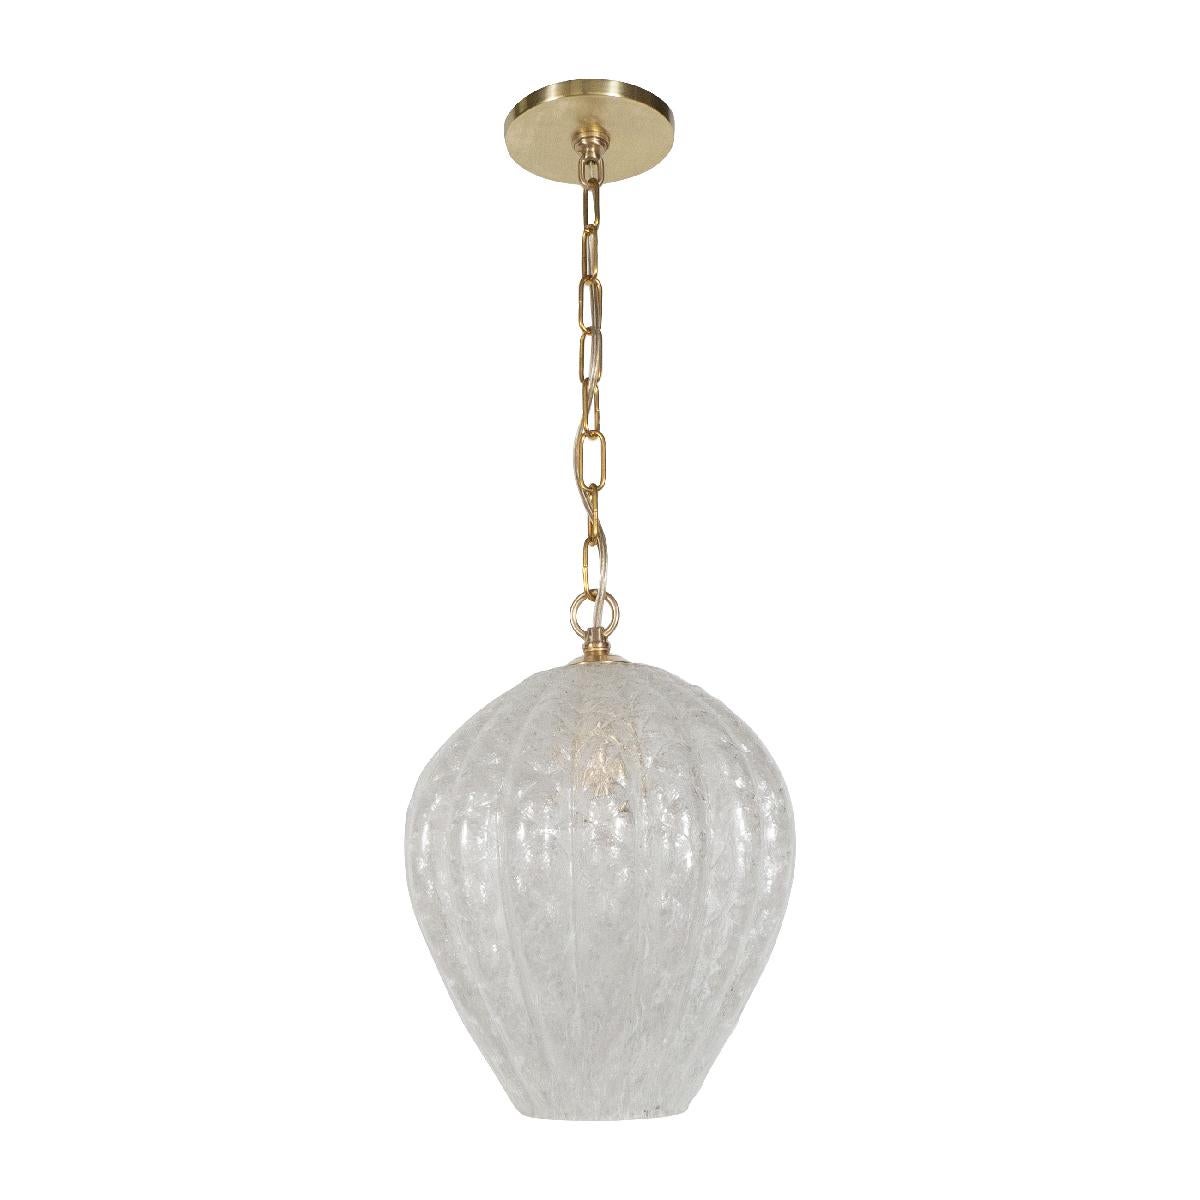 Fluted and frosted Murano glass bulb form pendant ceiling fixture. Measured without chain.